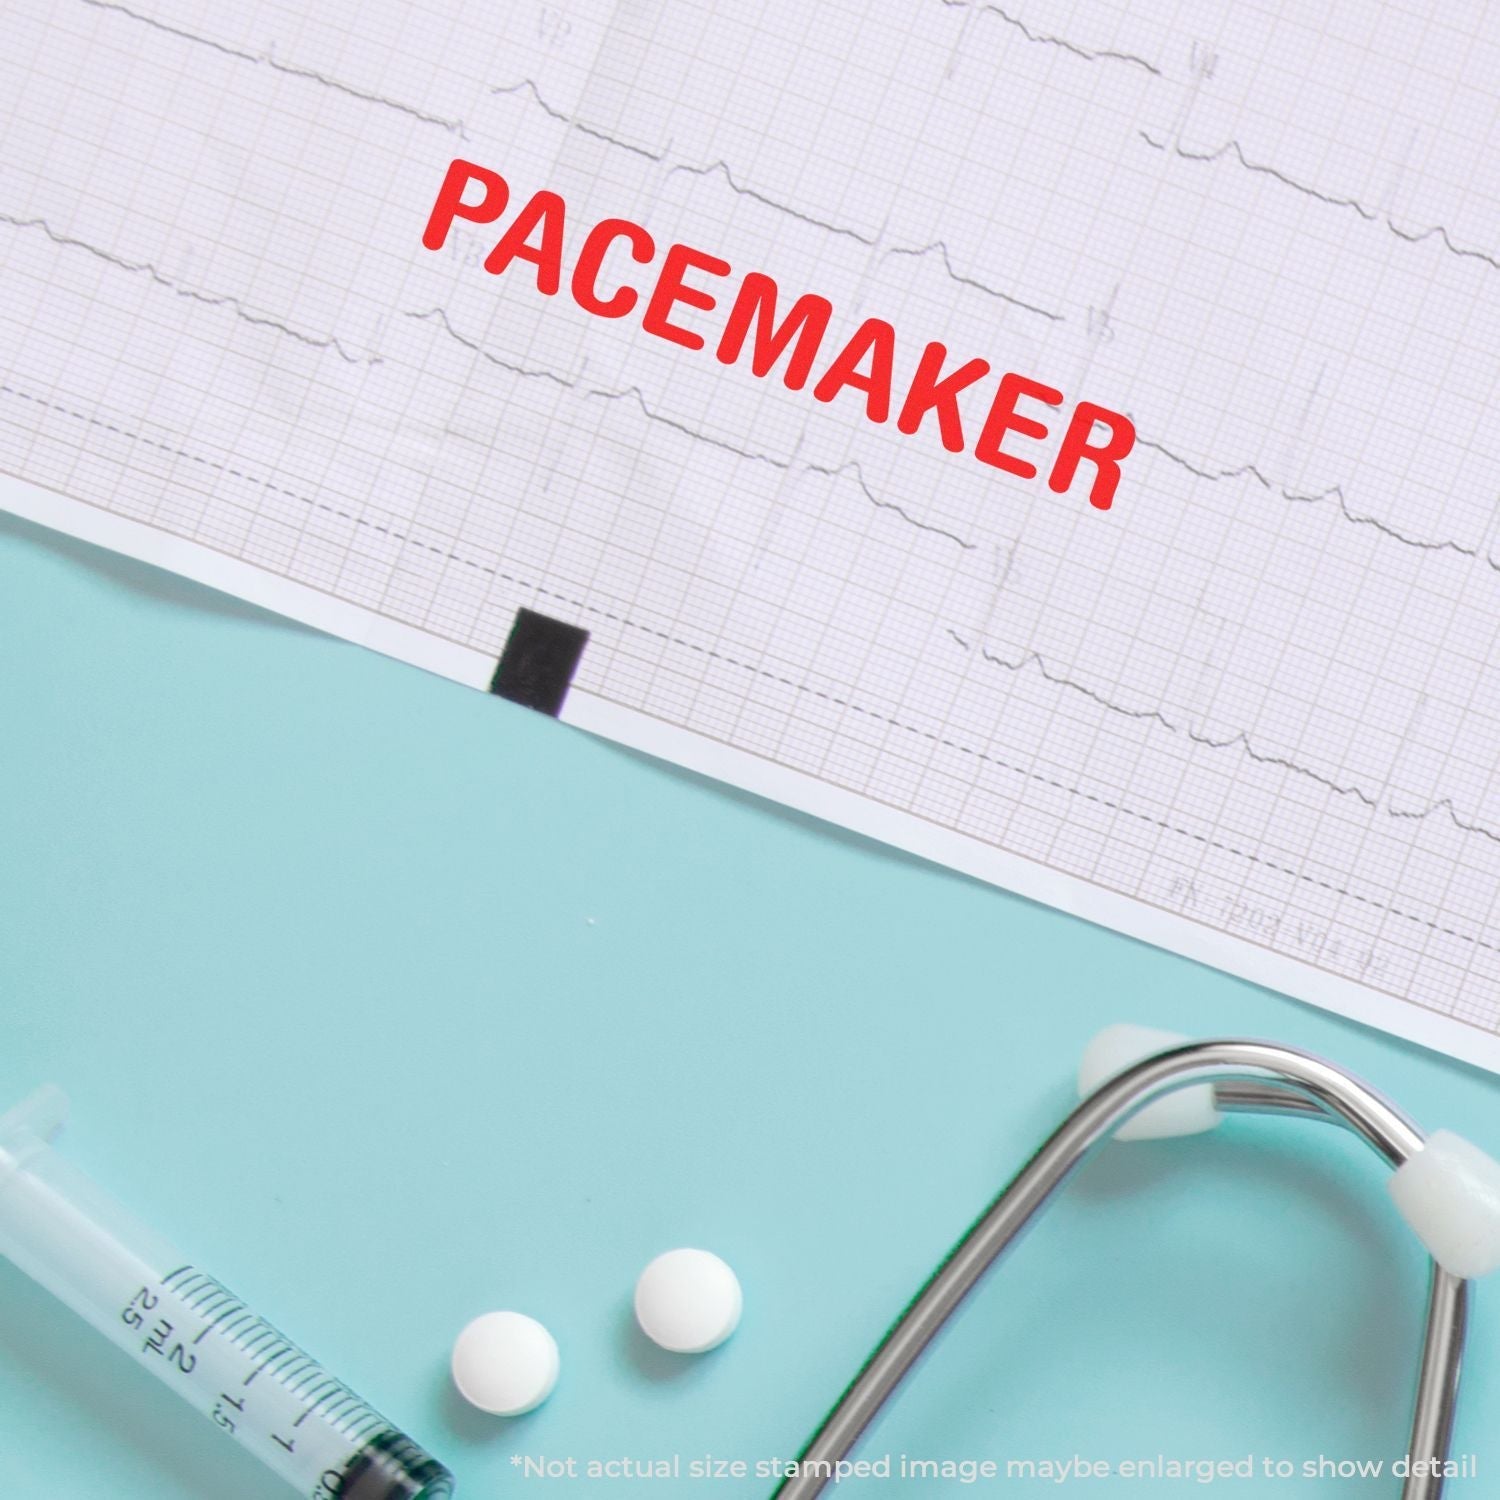 A self-inking stamp with a stamped image showing how the text "PACEMAKER" is displayed after stamping.